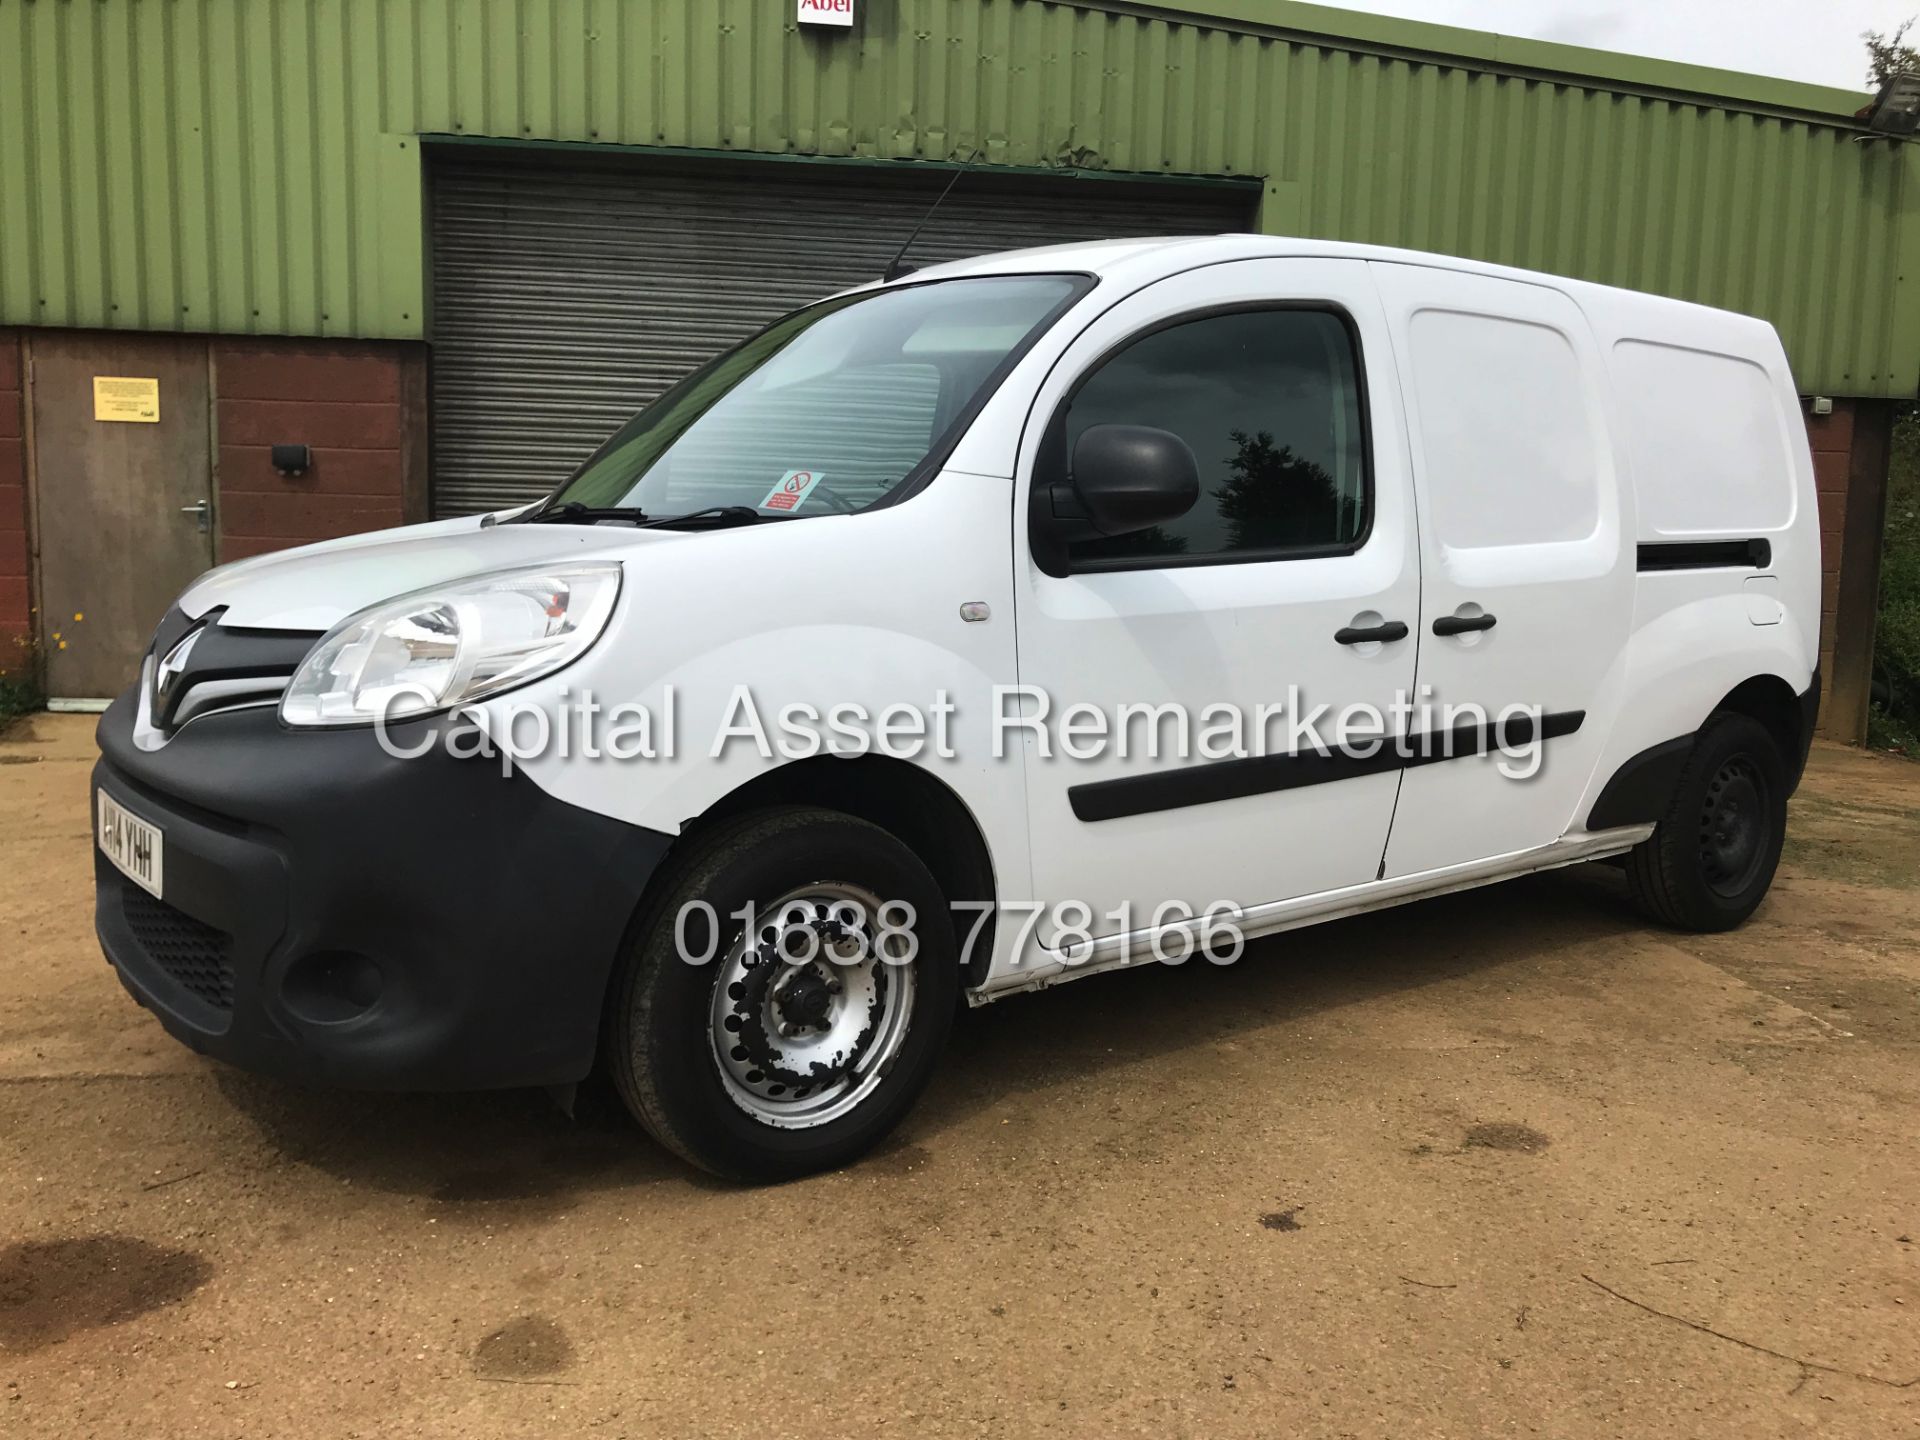 ON SALE RENAULT KANGOO 1.5DCI "MAXI EXTRA" XLWB (14 REG) 1 OWNER FSH - AIR CON - LOW MILES - Image 6 of 19